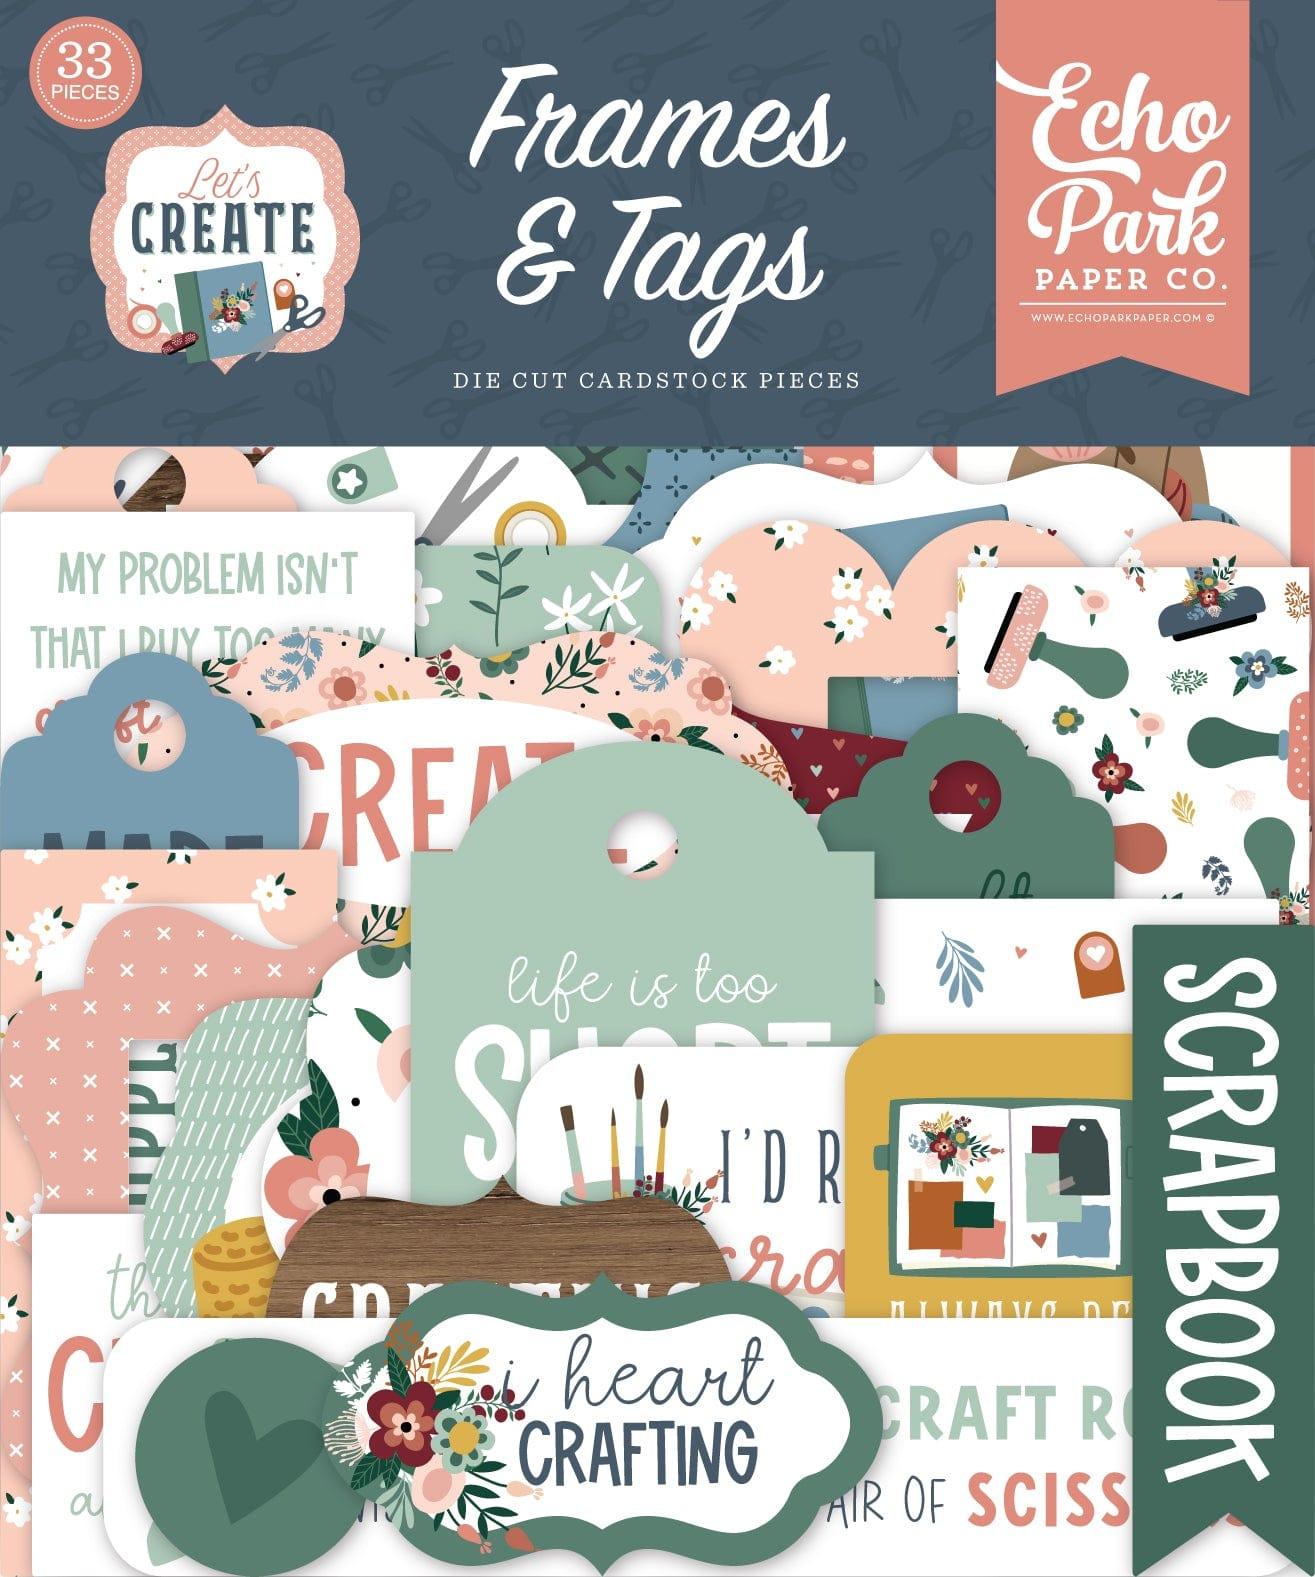 Let's Create Collection 5 x 5 Scrapbook Tags & Frames Die Cuts by Echo Park Paper - Scrapbook Supply Companies